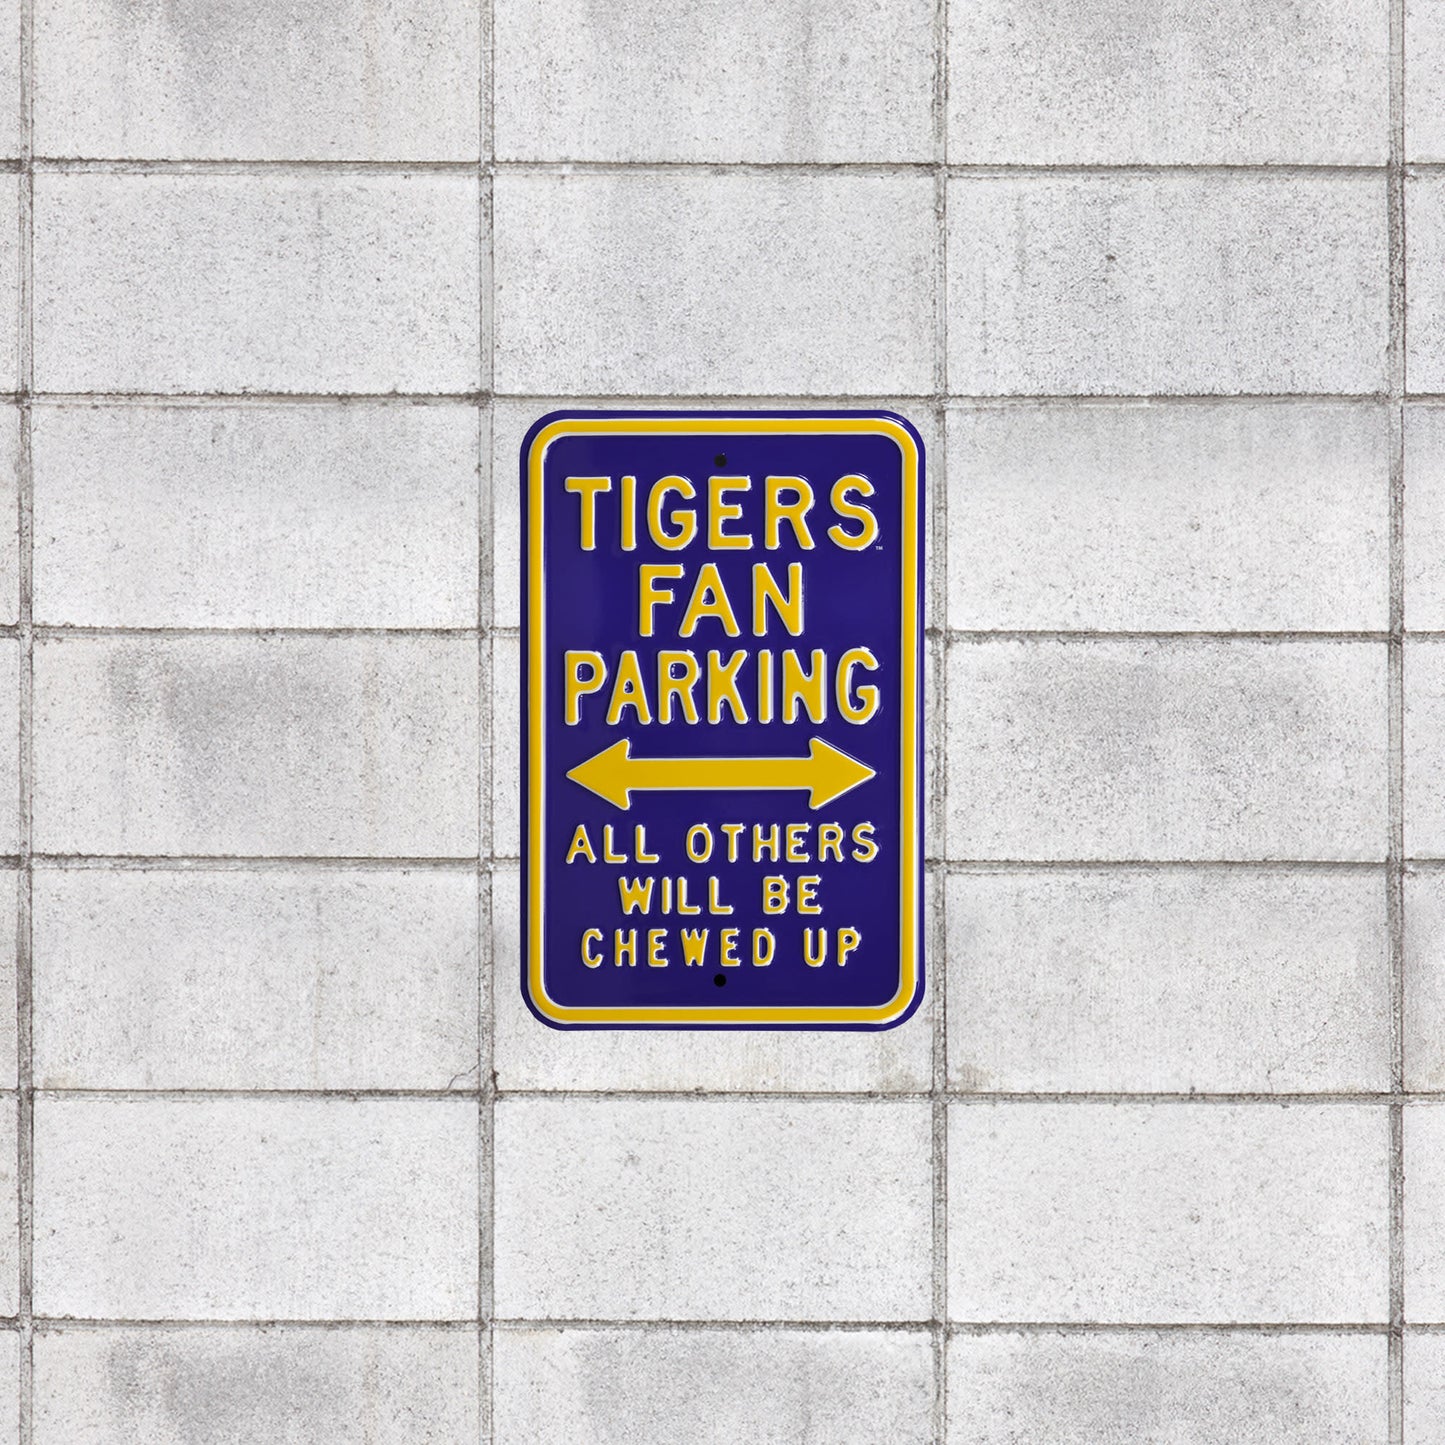 LSU Tigers: Chewed Up Parking - Officially Licensed Metal Street Sign